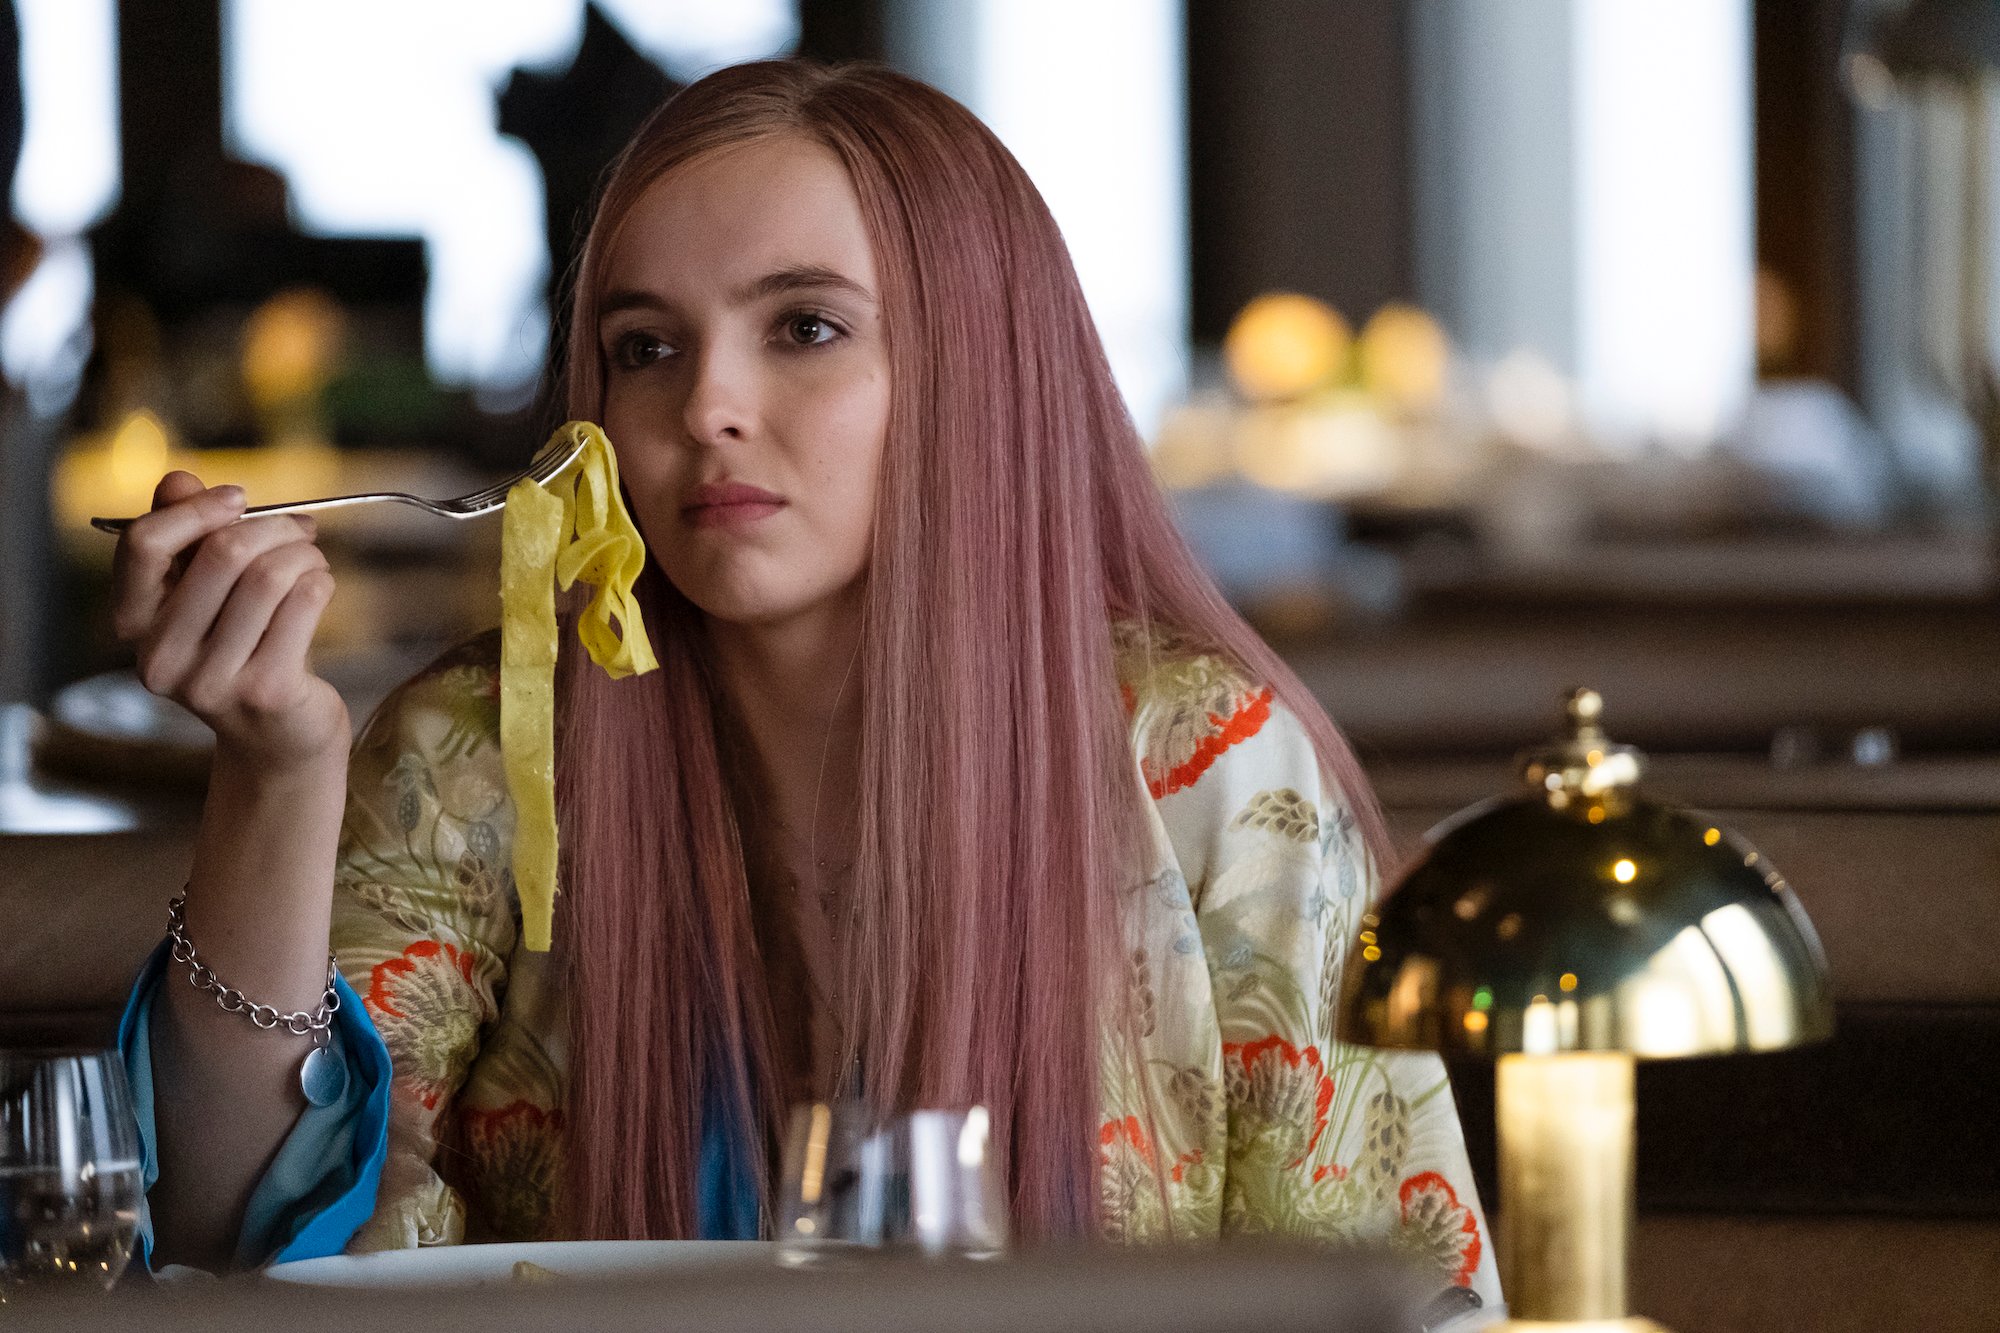 Does Villanelle Eat More Than The Average TV Character? Not According to Jodie Comer - Showbiz Cheat Sheet